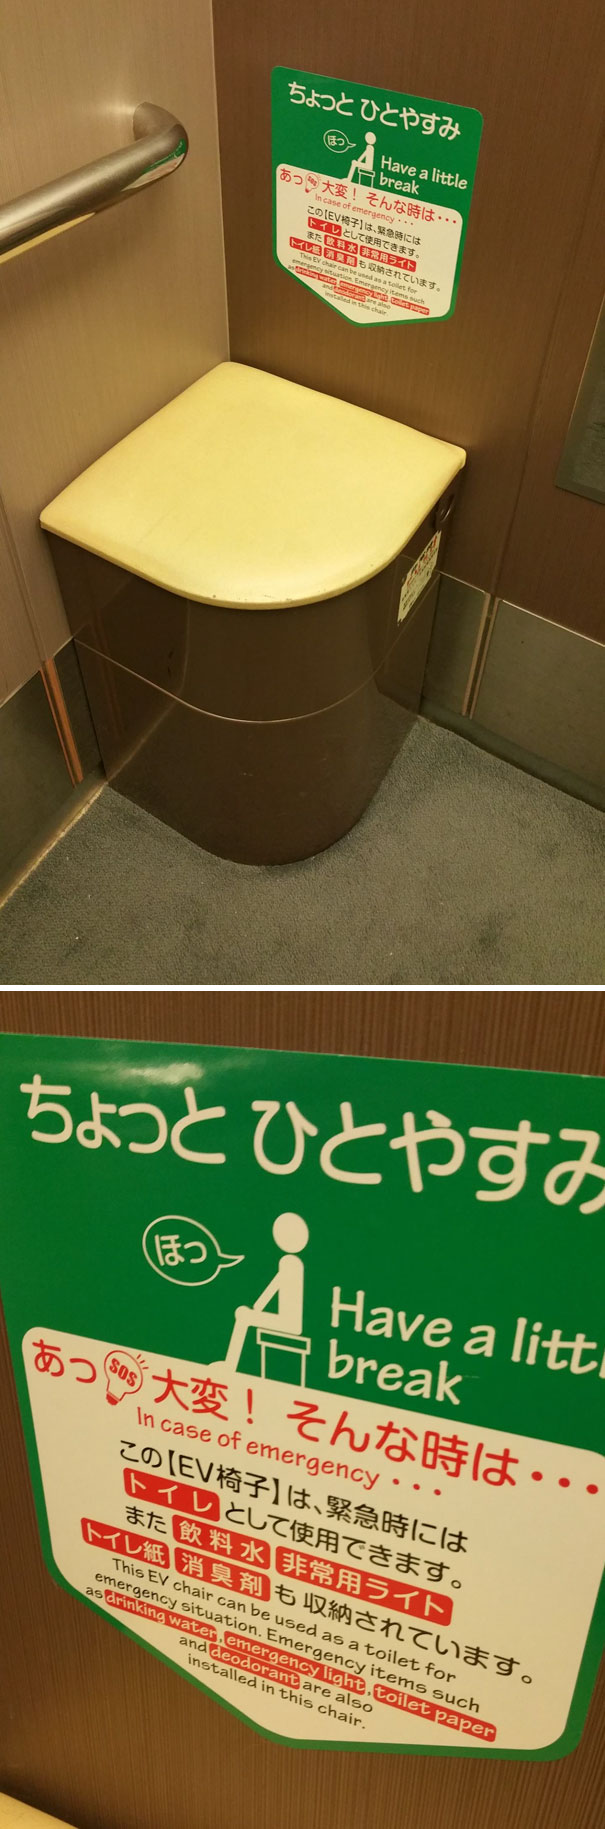 20 Pictures That Would Make You Believe Japan Is A Country Different From Others